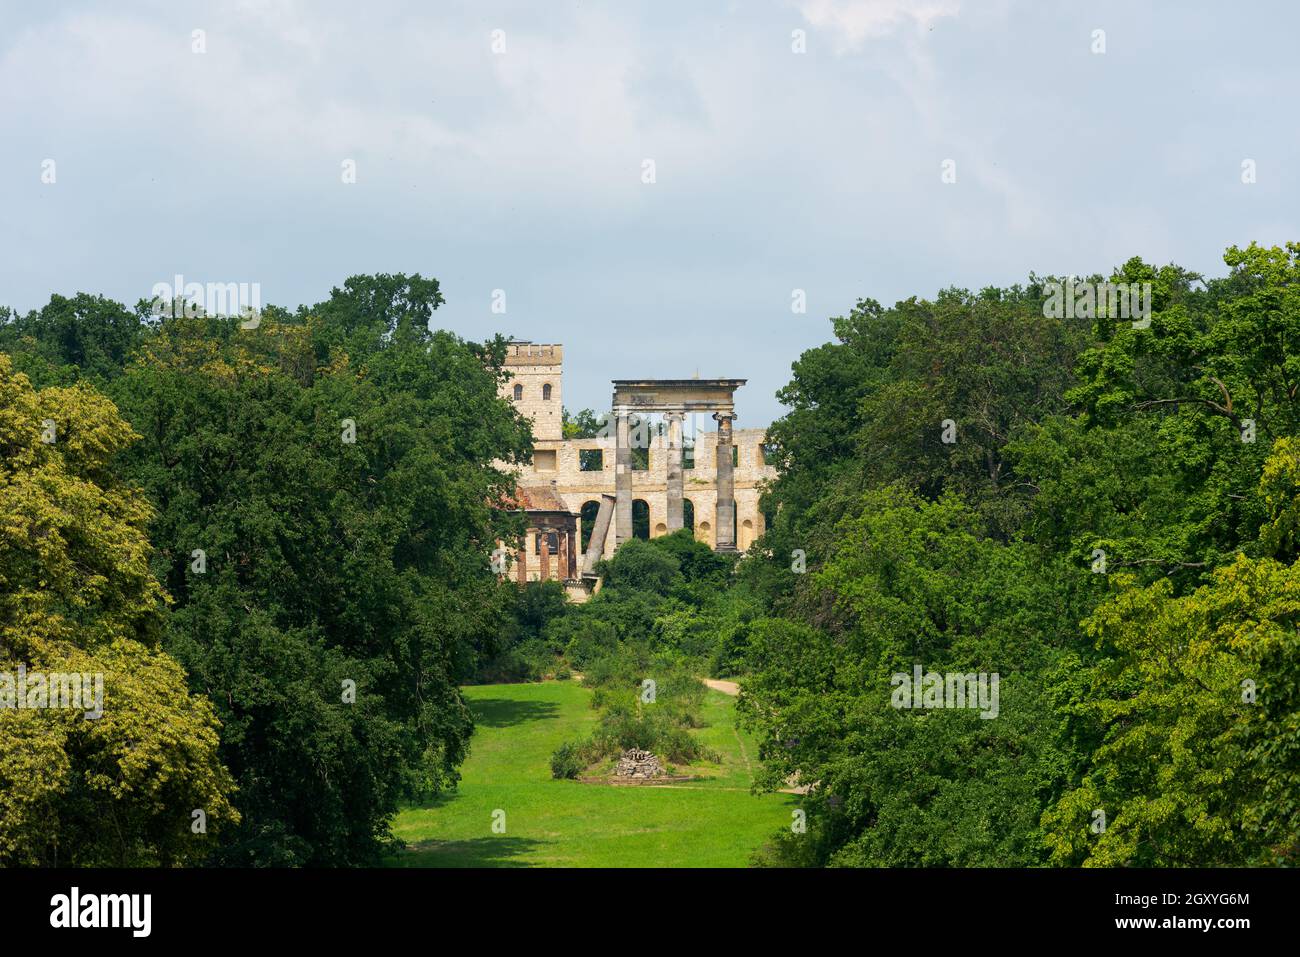 Norman tower in Potsdam, ruins inside castle park between trees Stock Photo